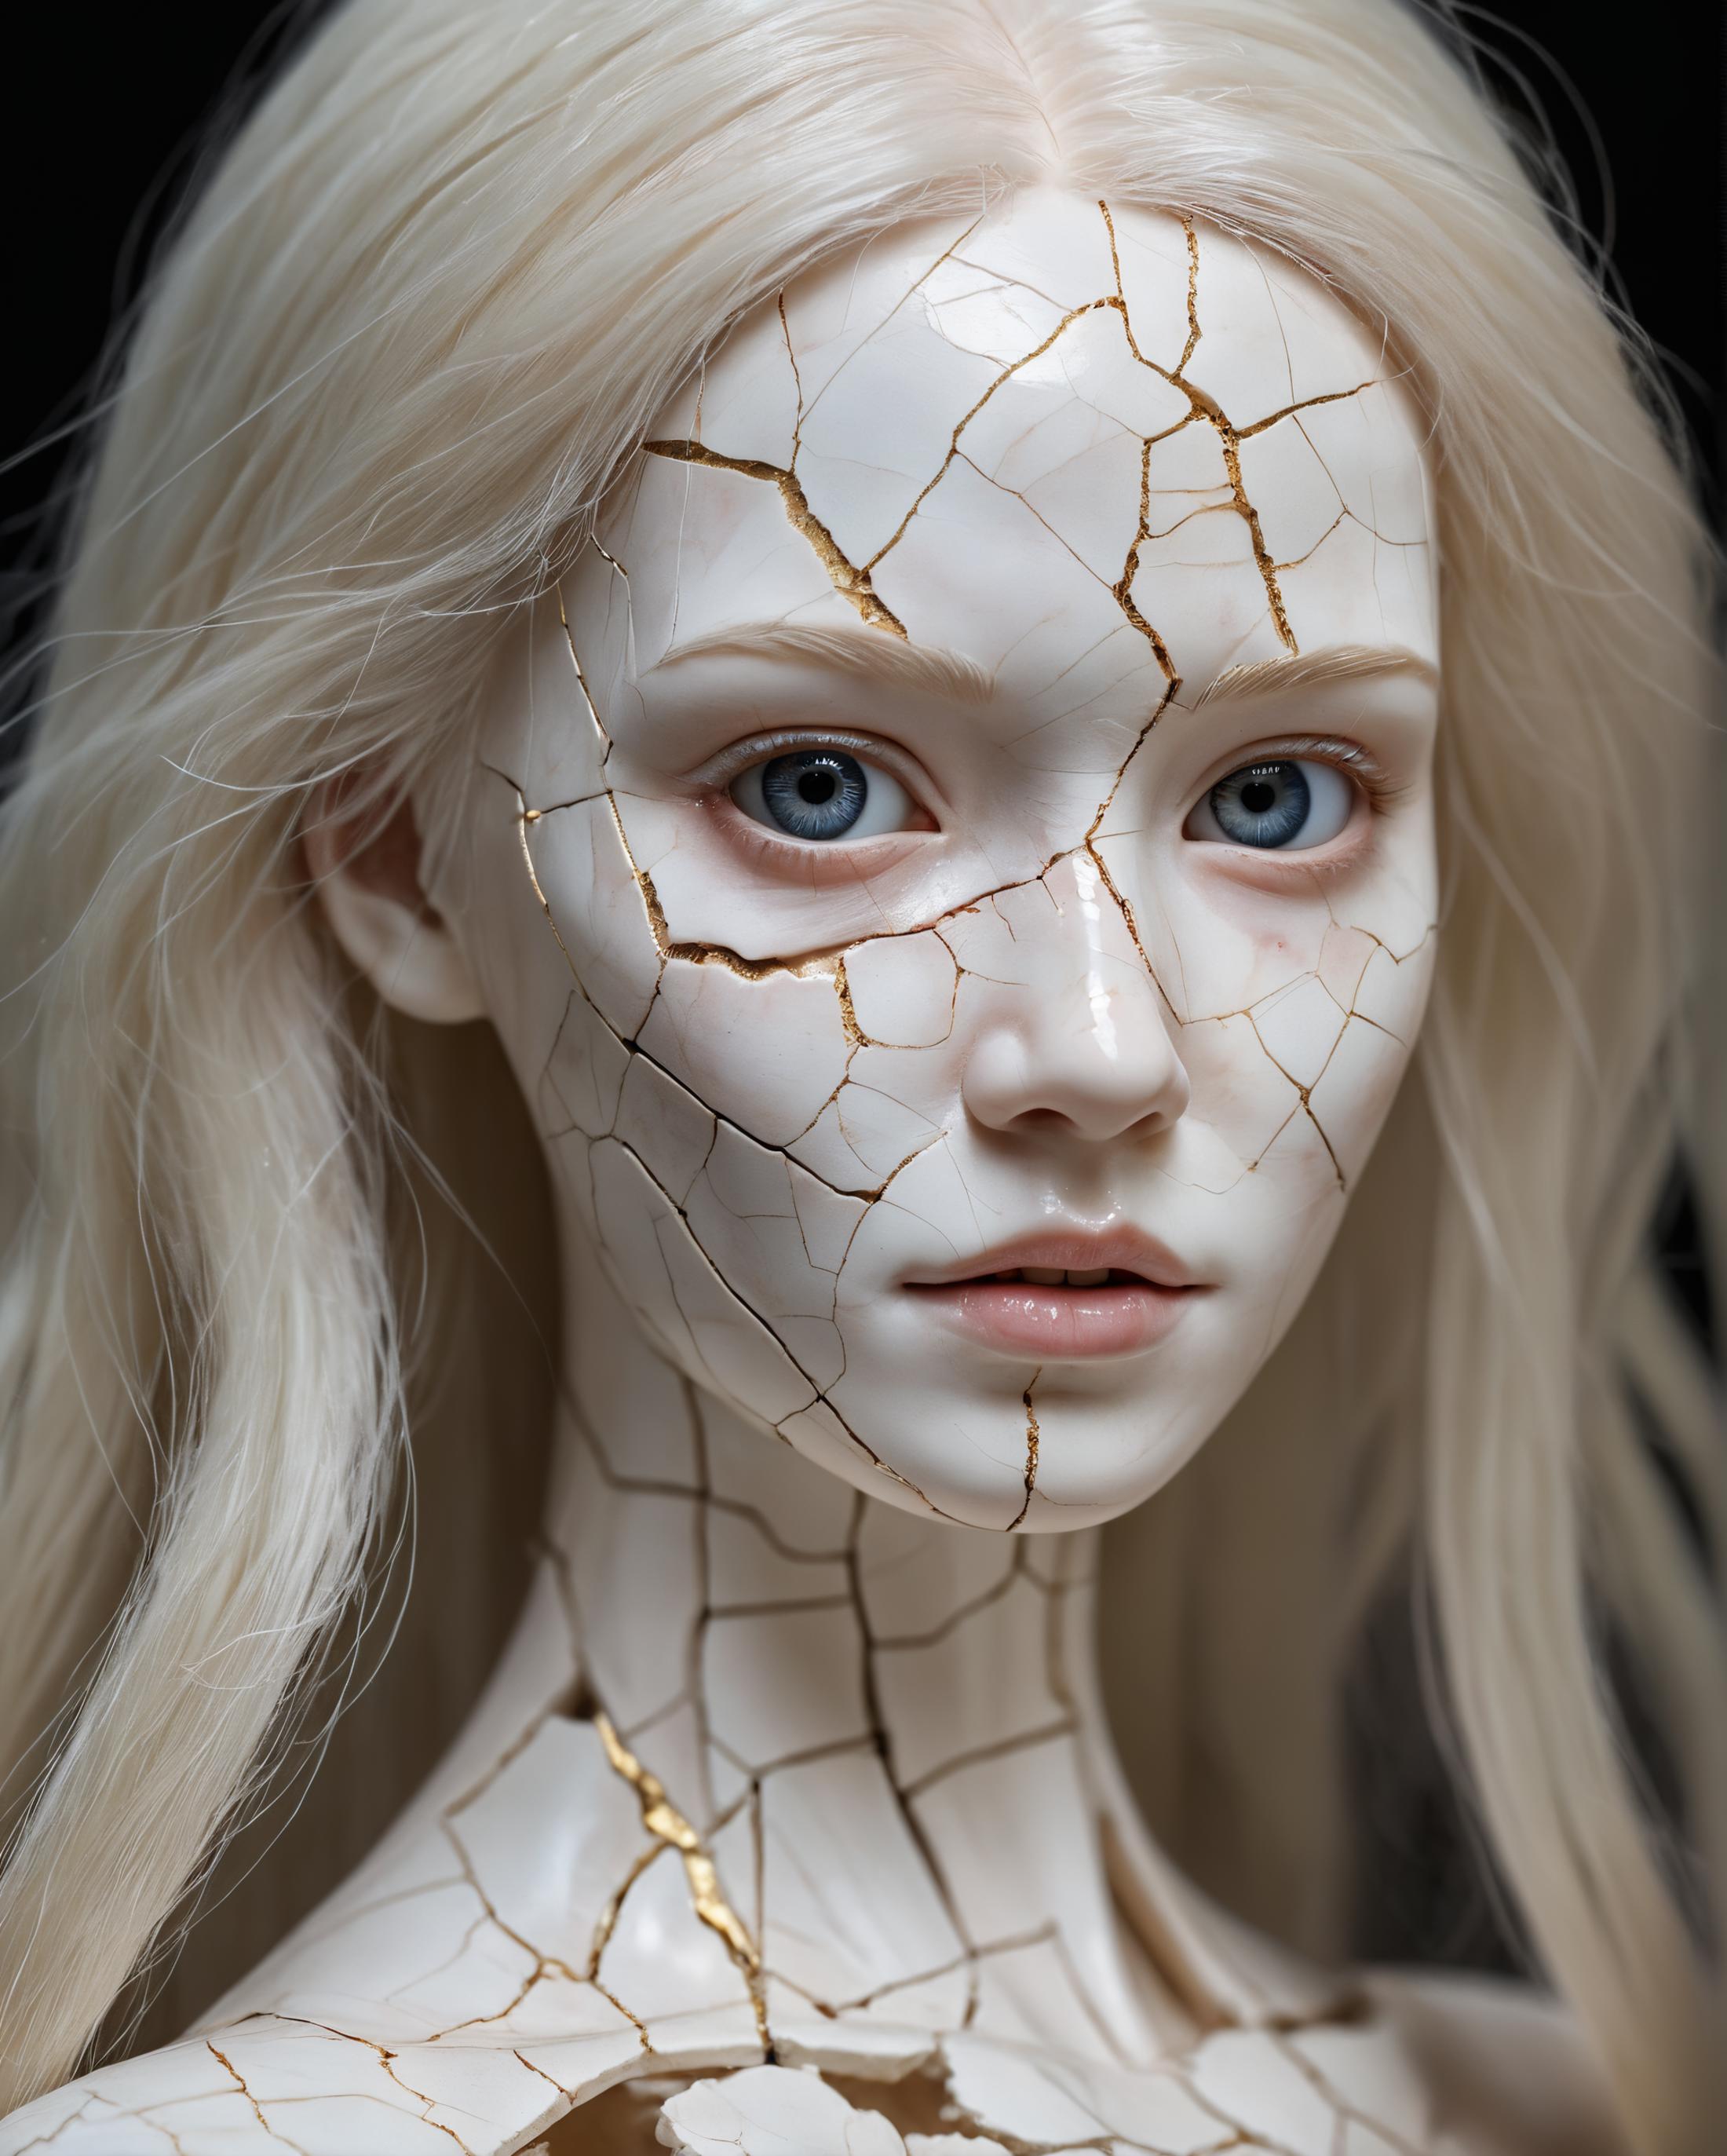 Doll with chipped white paint on face and neck.